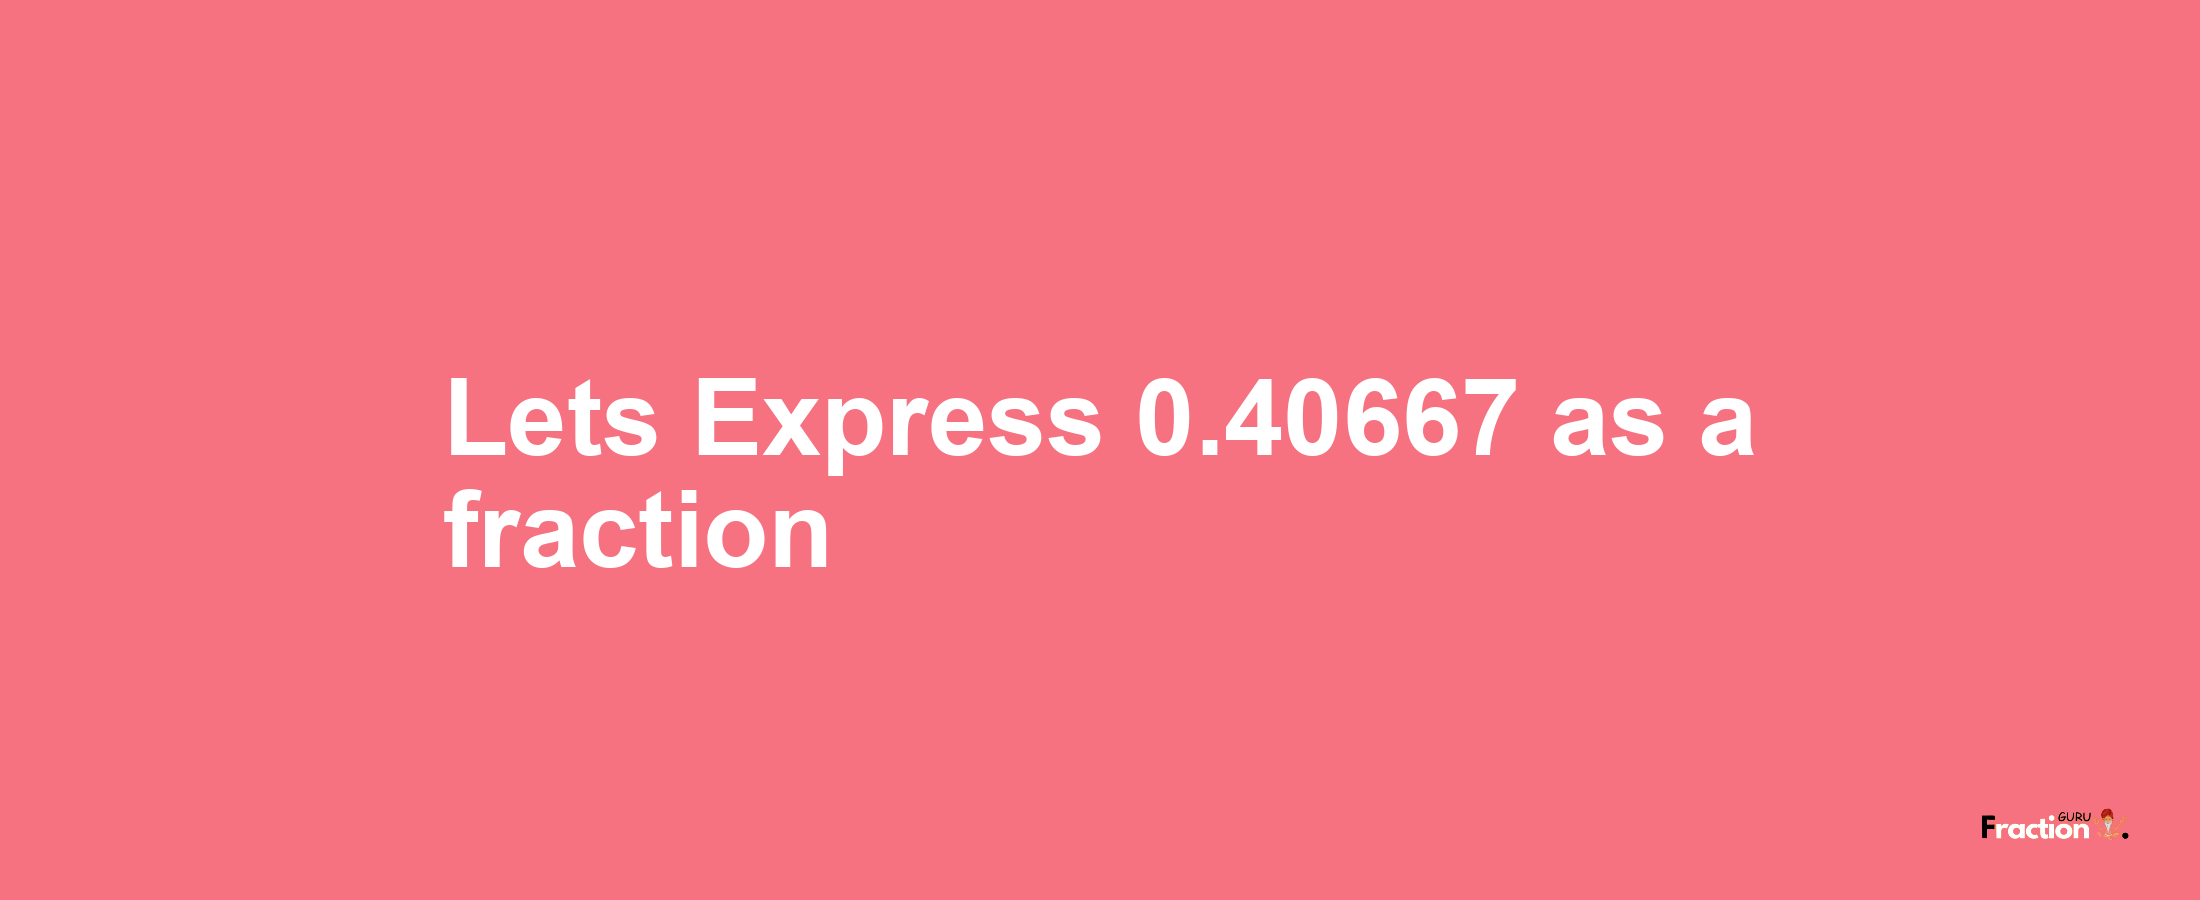 Lets Express 0.40667 as afraction